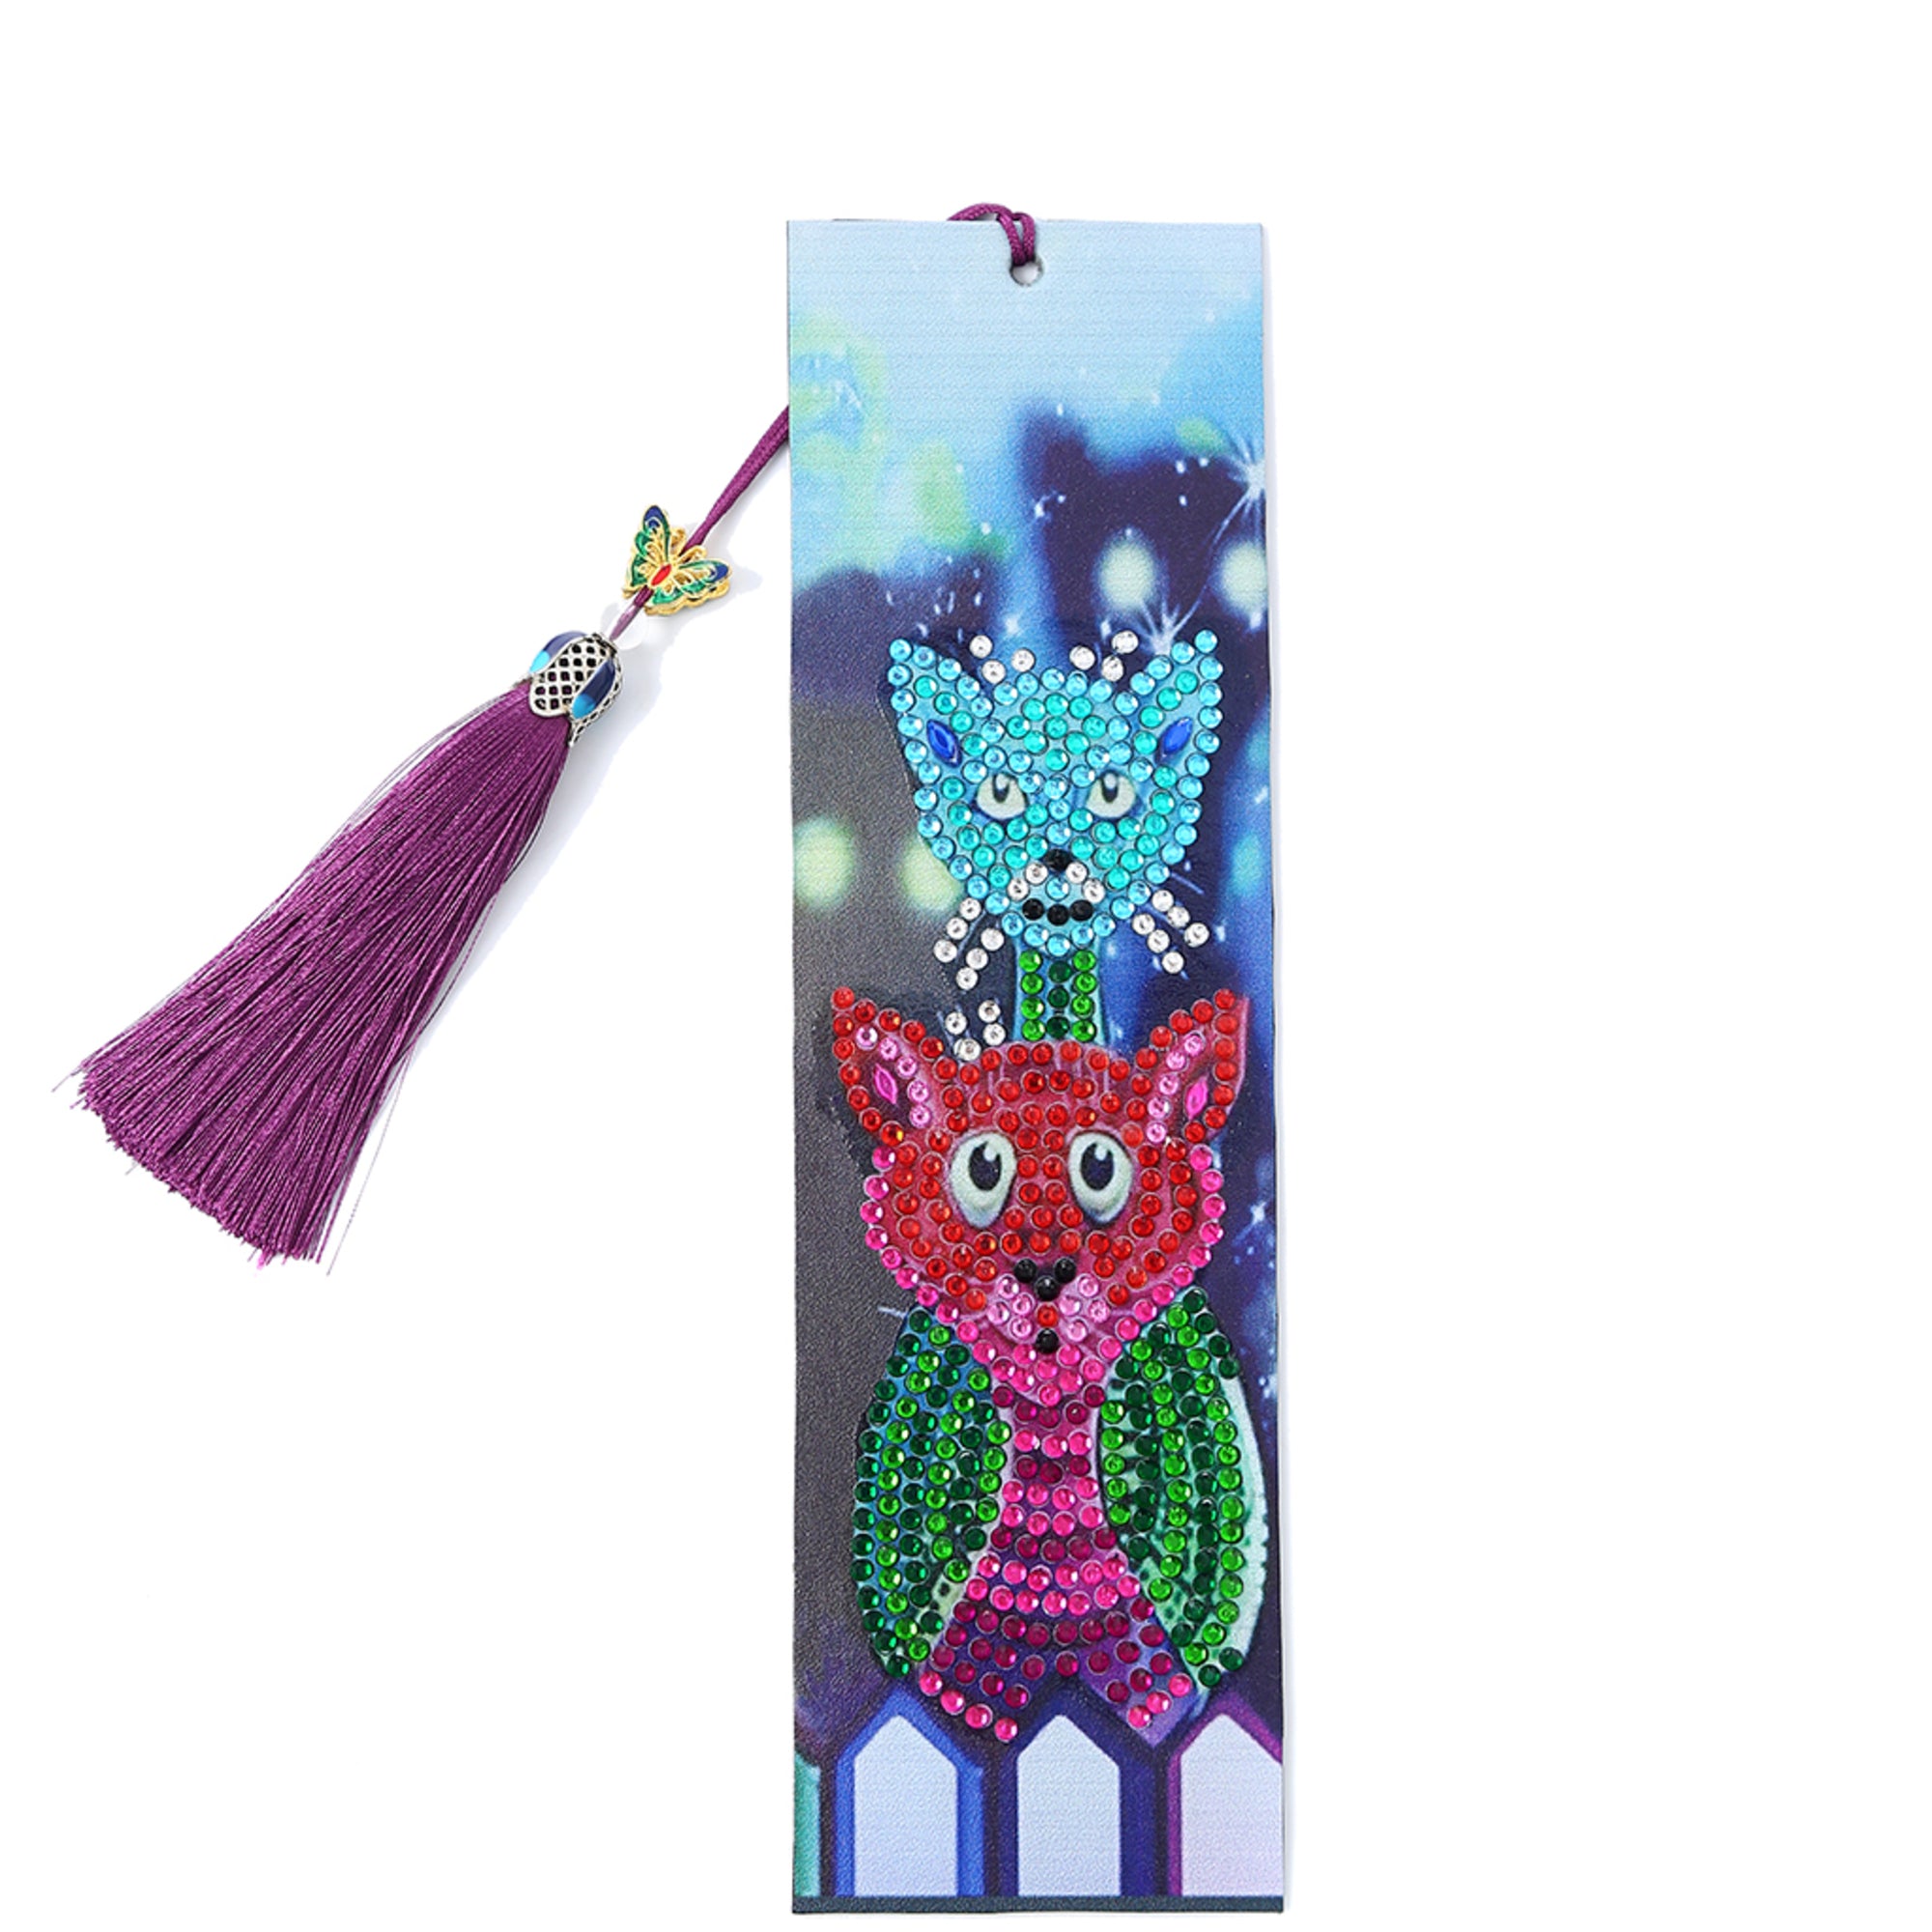 Diamond Painting Giftable Bookmarks. Includes rhinestones to make the